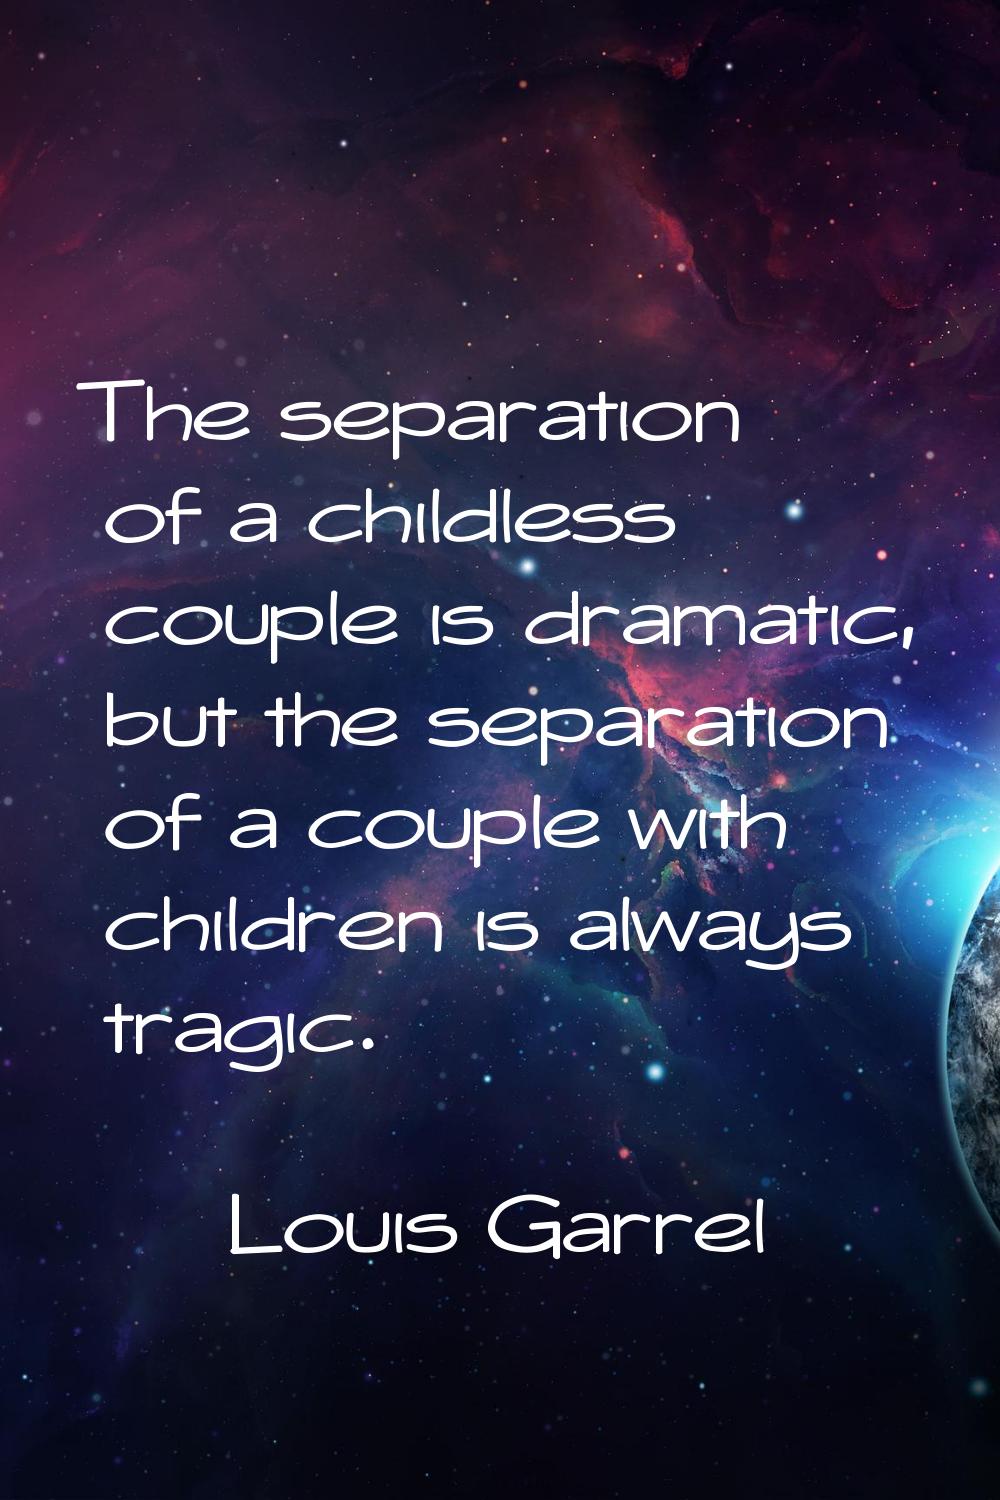 The separation of a childless couple is dramatic, but the separation of a couple with children is a